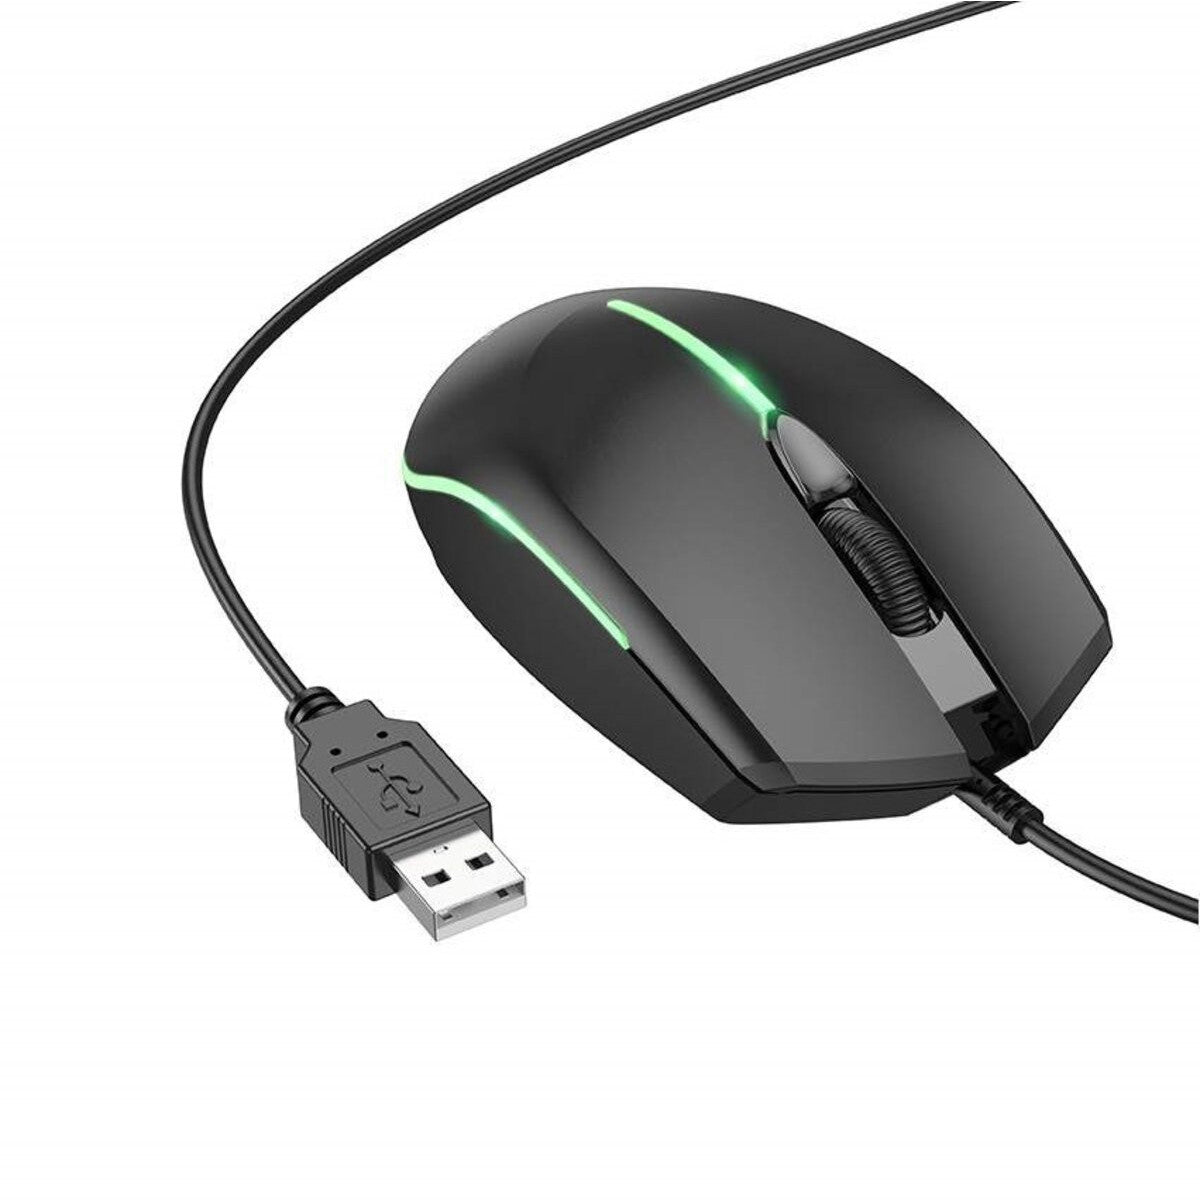 BG10 Soaring game luminous wired mouse